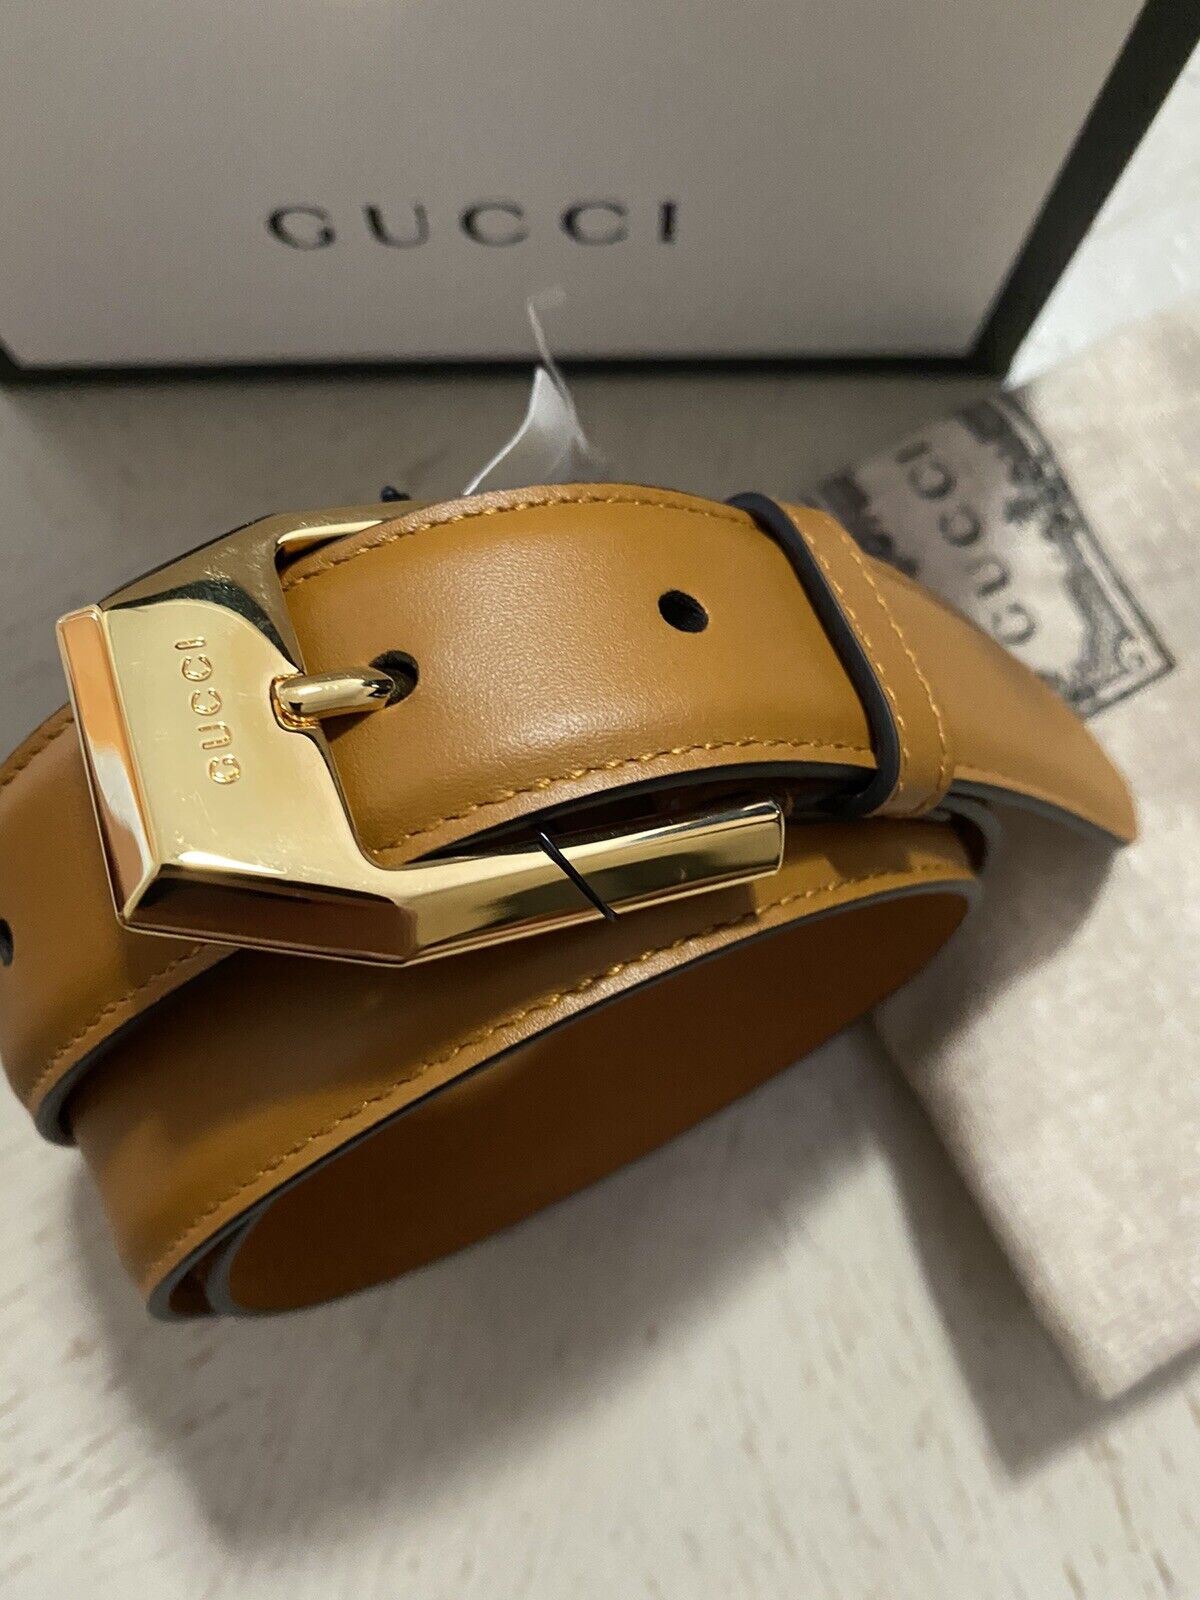 New Gucci Mens Leather Belt Gucci Monogram Brown 95/38 Italy